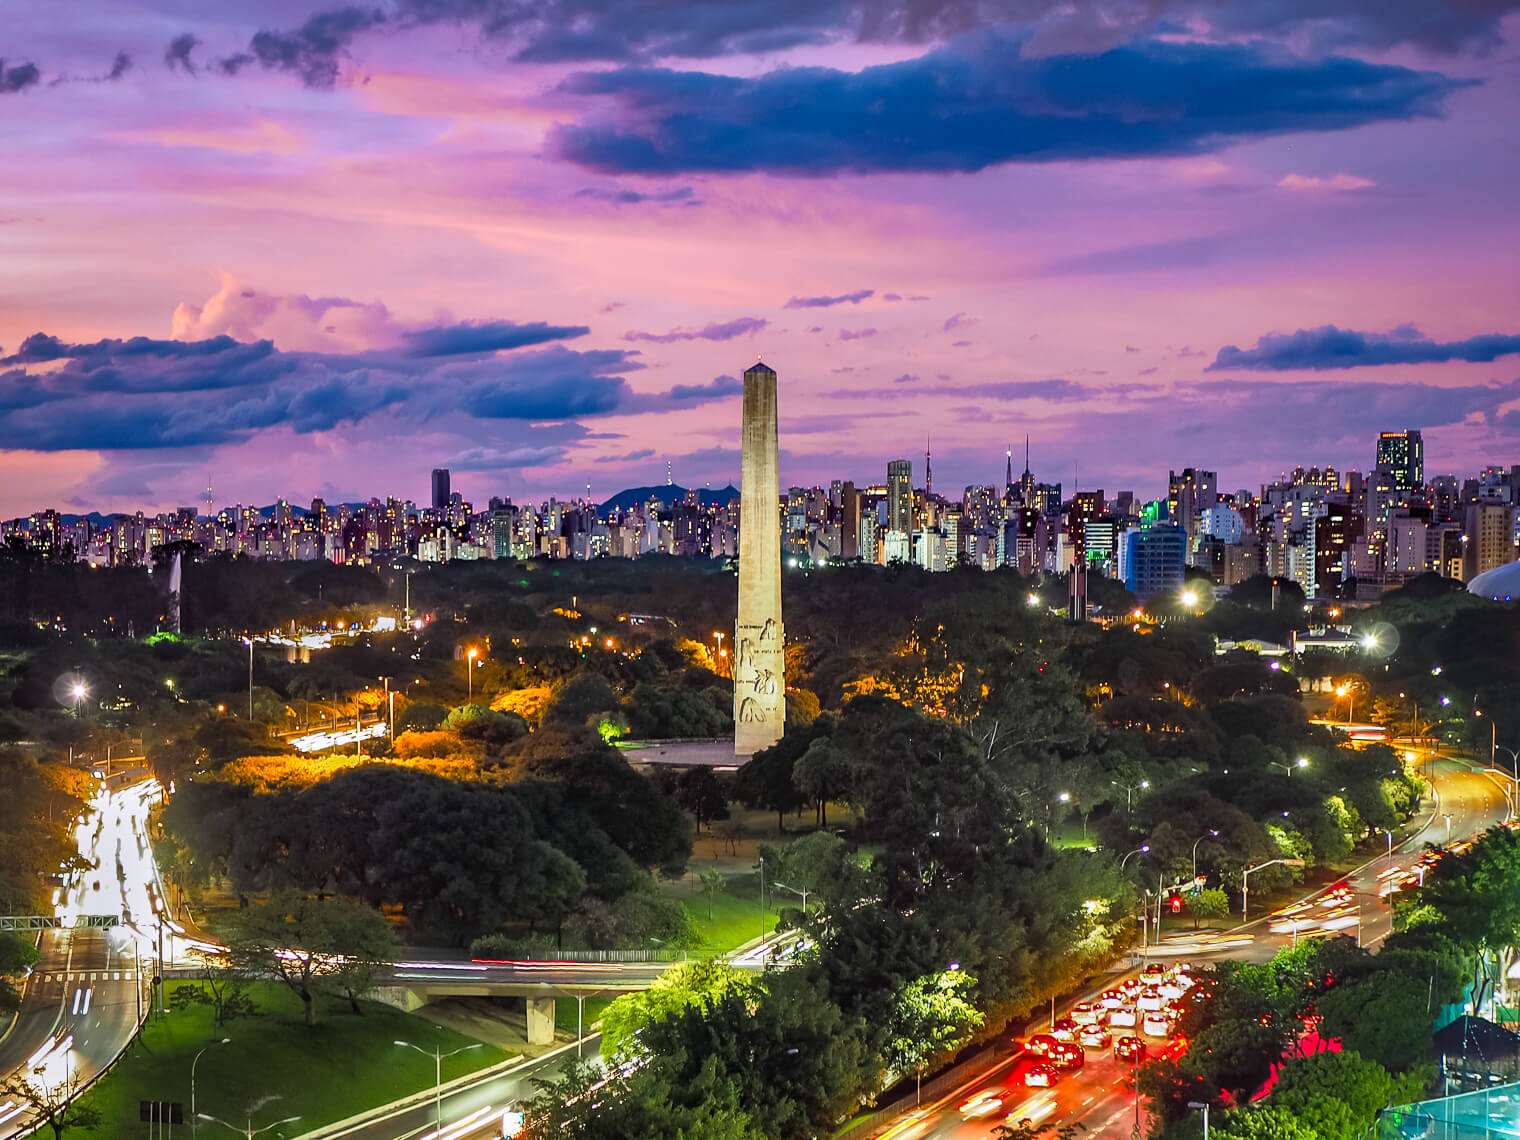 Sao Paulo  The city of Sao Paulo is the biggest and wealthiest in